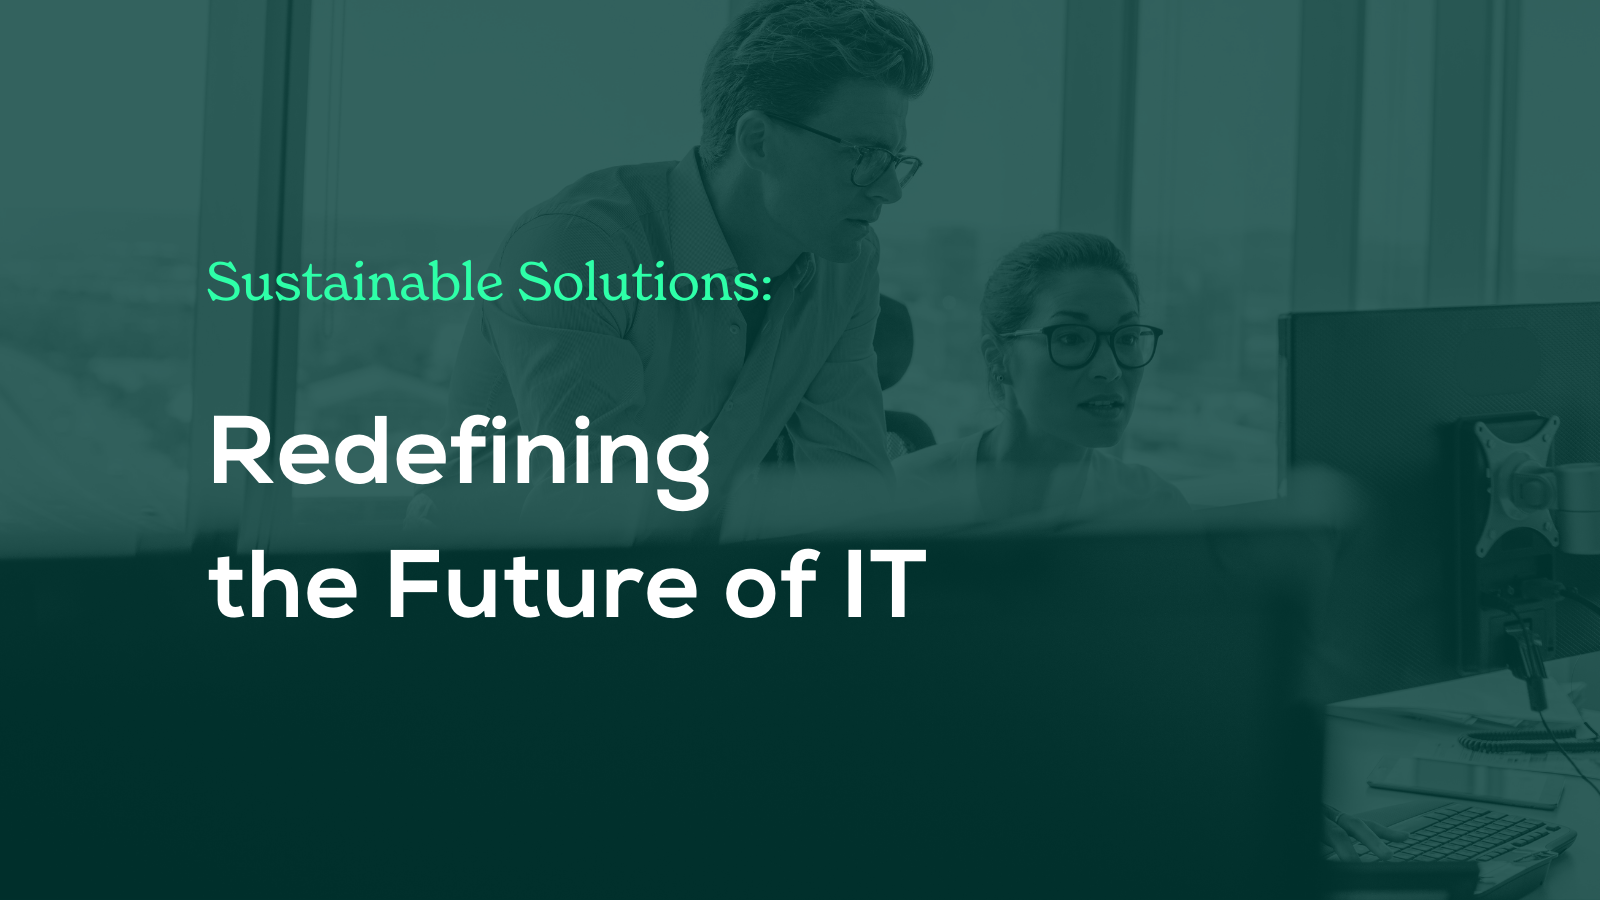 Sustainable Solutions: Redefining the Future of IT